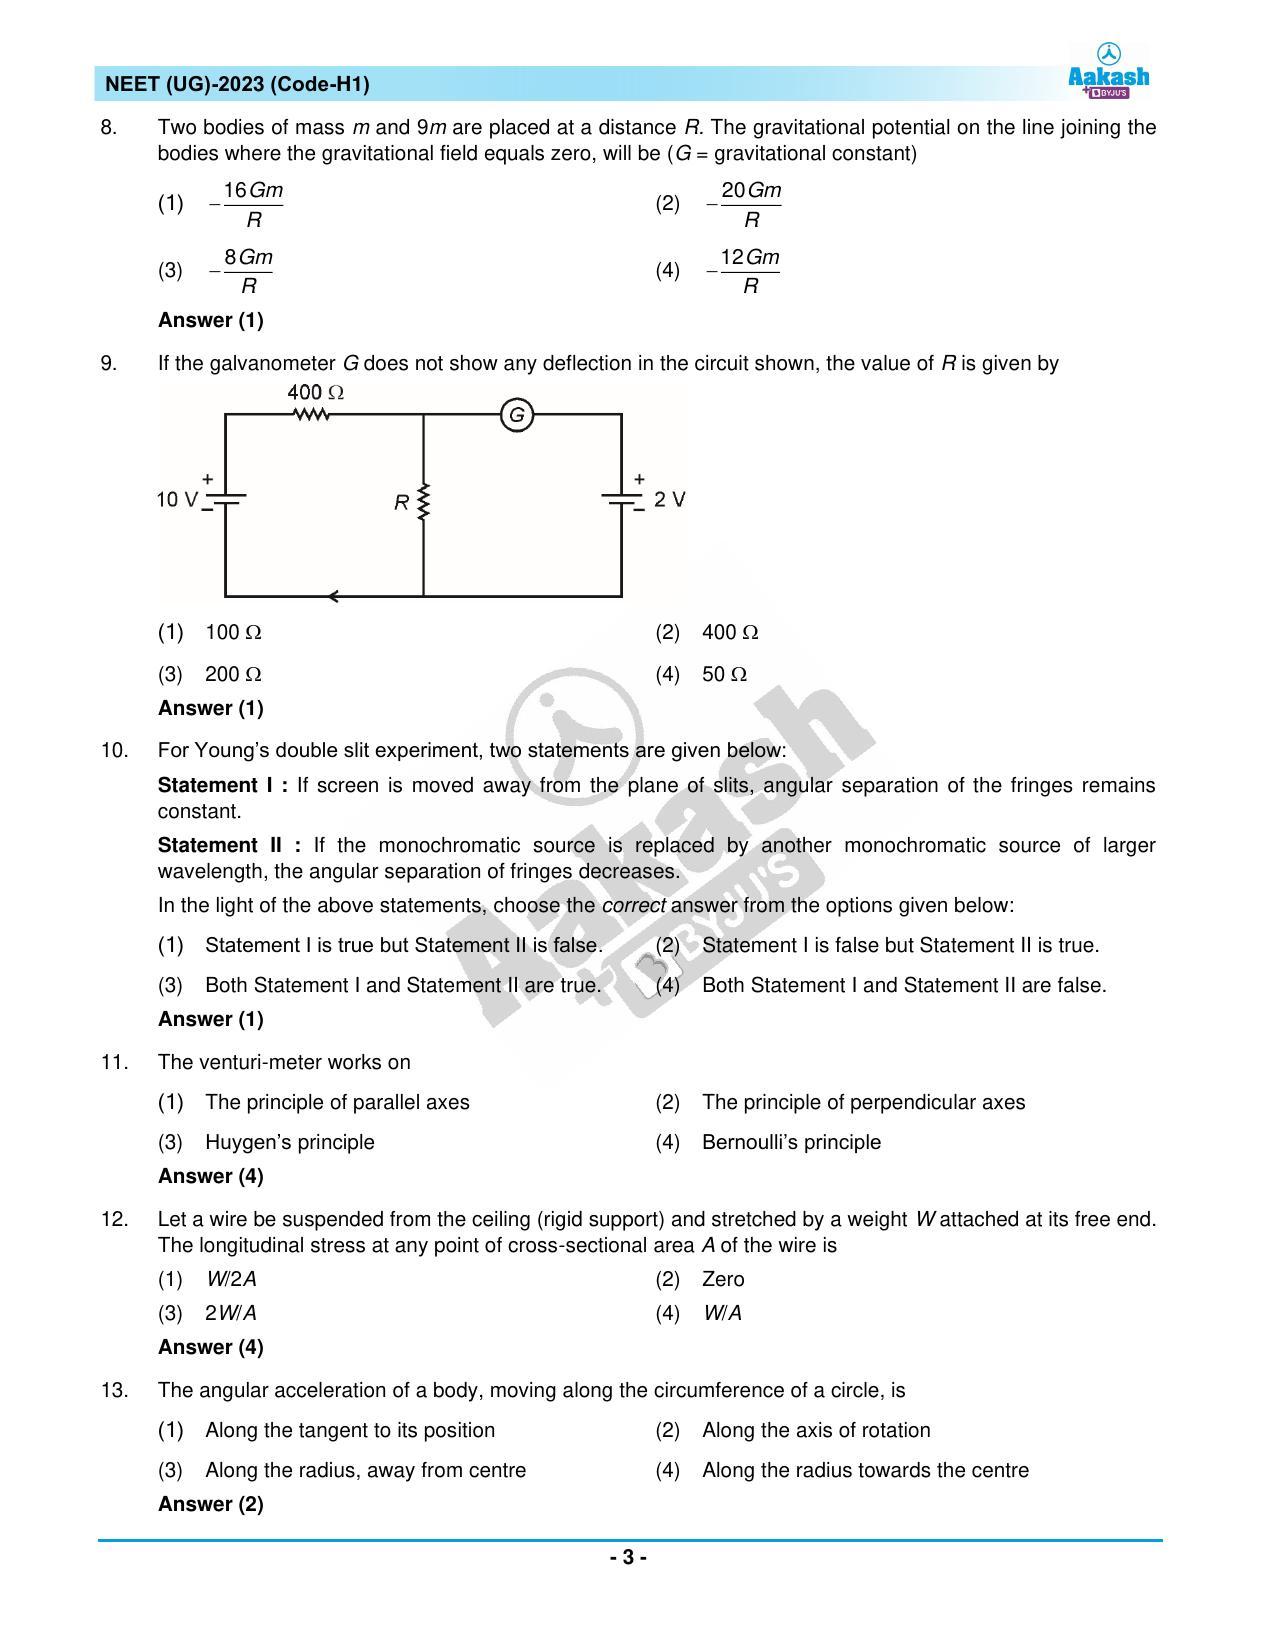 NEET 2023 Question Paper H1 - Page 3